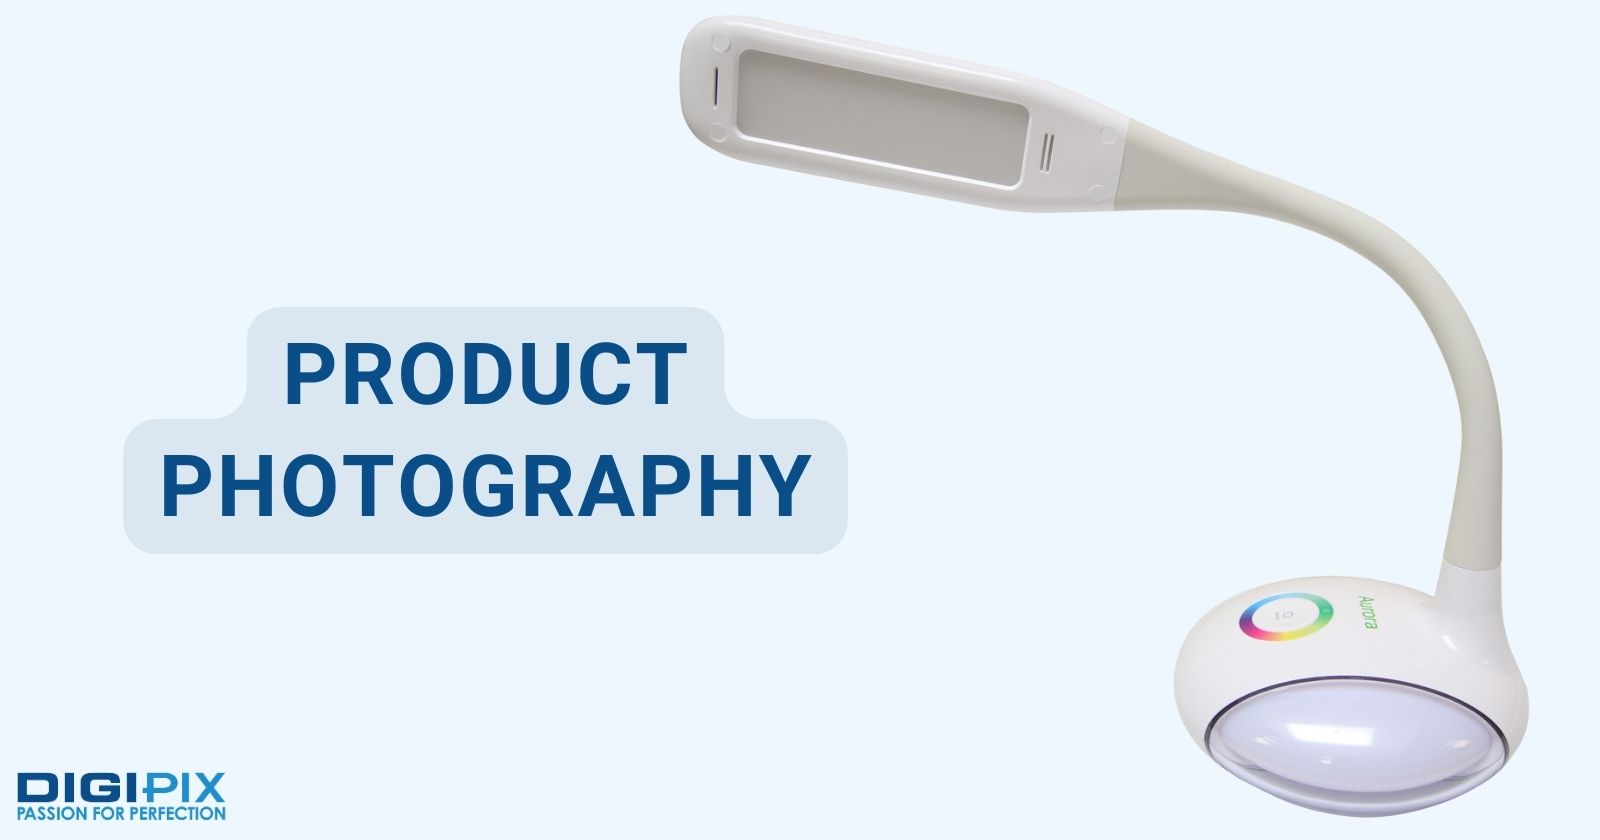 Why Product Photography is Important